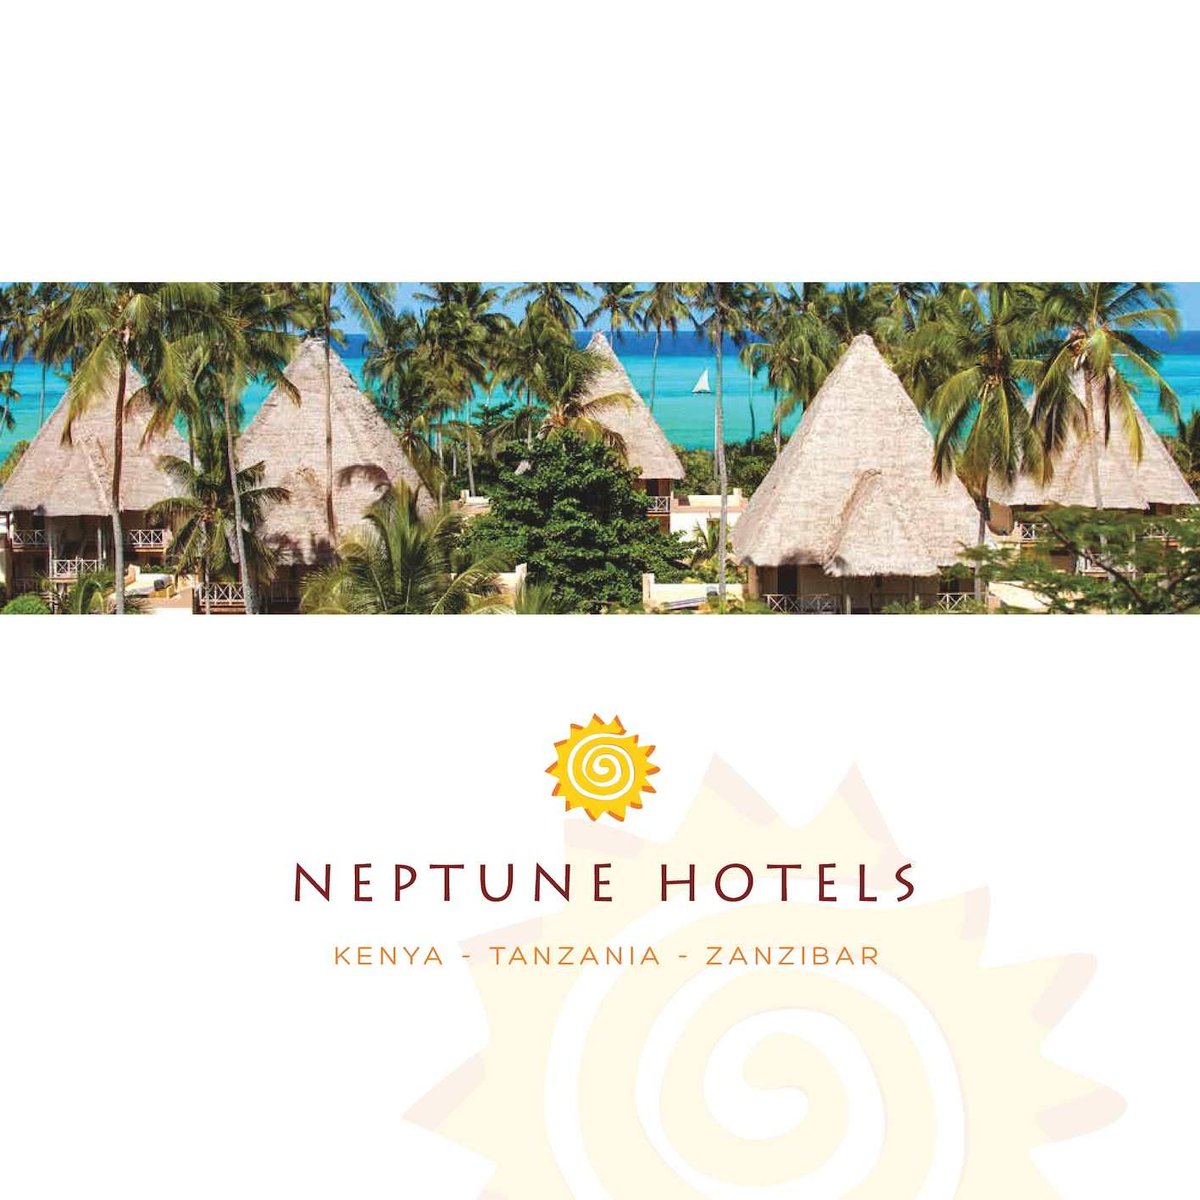 Hello Nyakundi. ID tupa mbali. Kindly expose Neptune Hotels. They call casual workers to help out during events, work for long hours later they don't pay. Ukienda kudai watchmen there don't allow you to get in. It's frustrating.